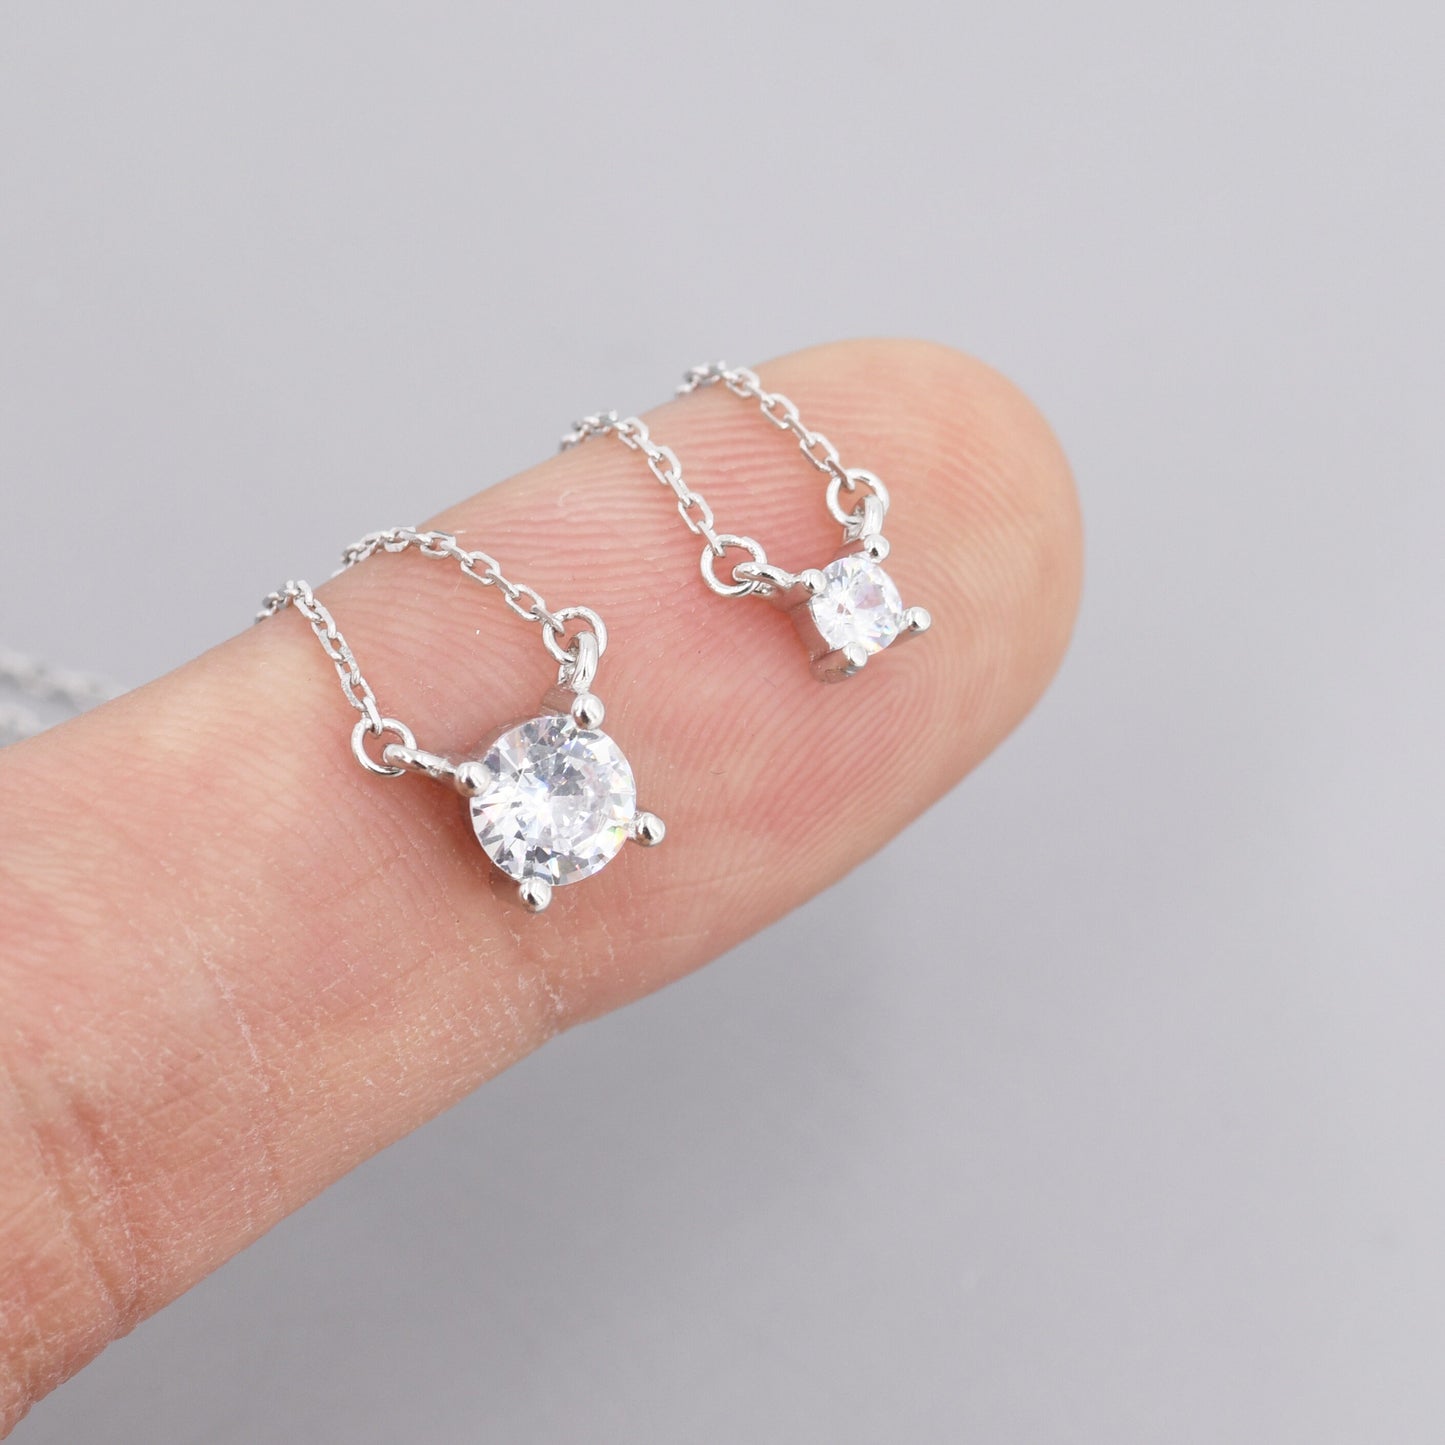 Extra Tiny CZ Necklace in Sterling Silver, Silver or Gold, Diamond Cut CZ Pendant Necklace